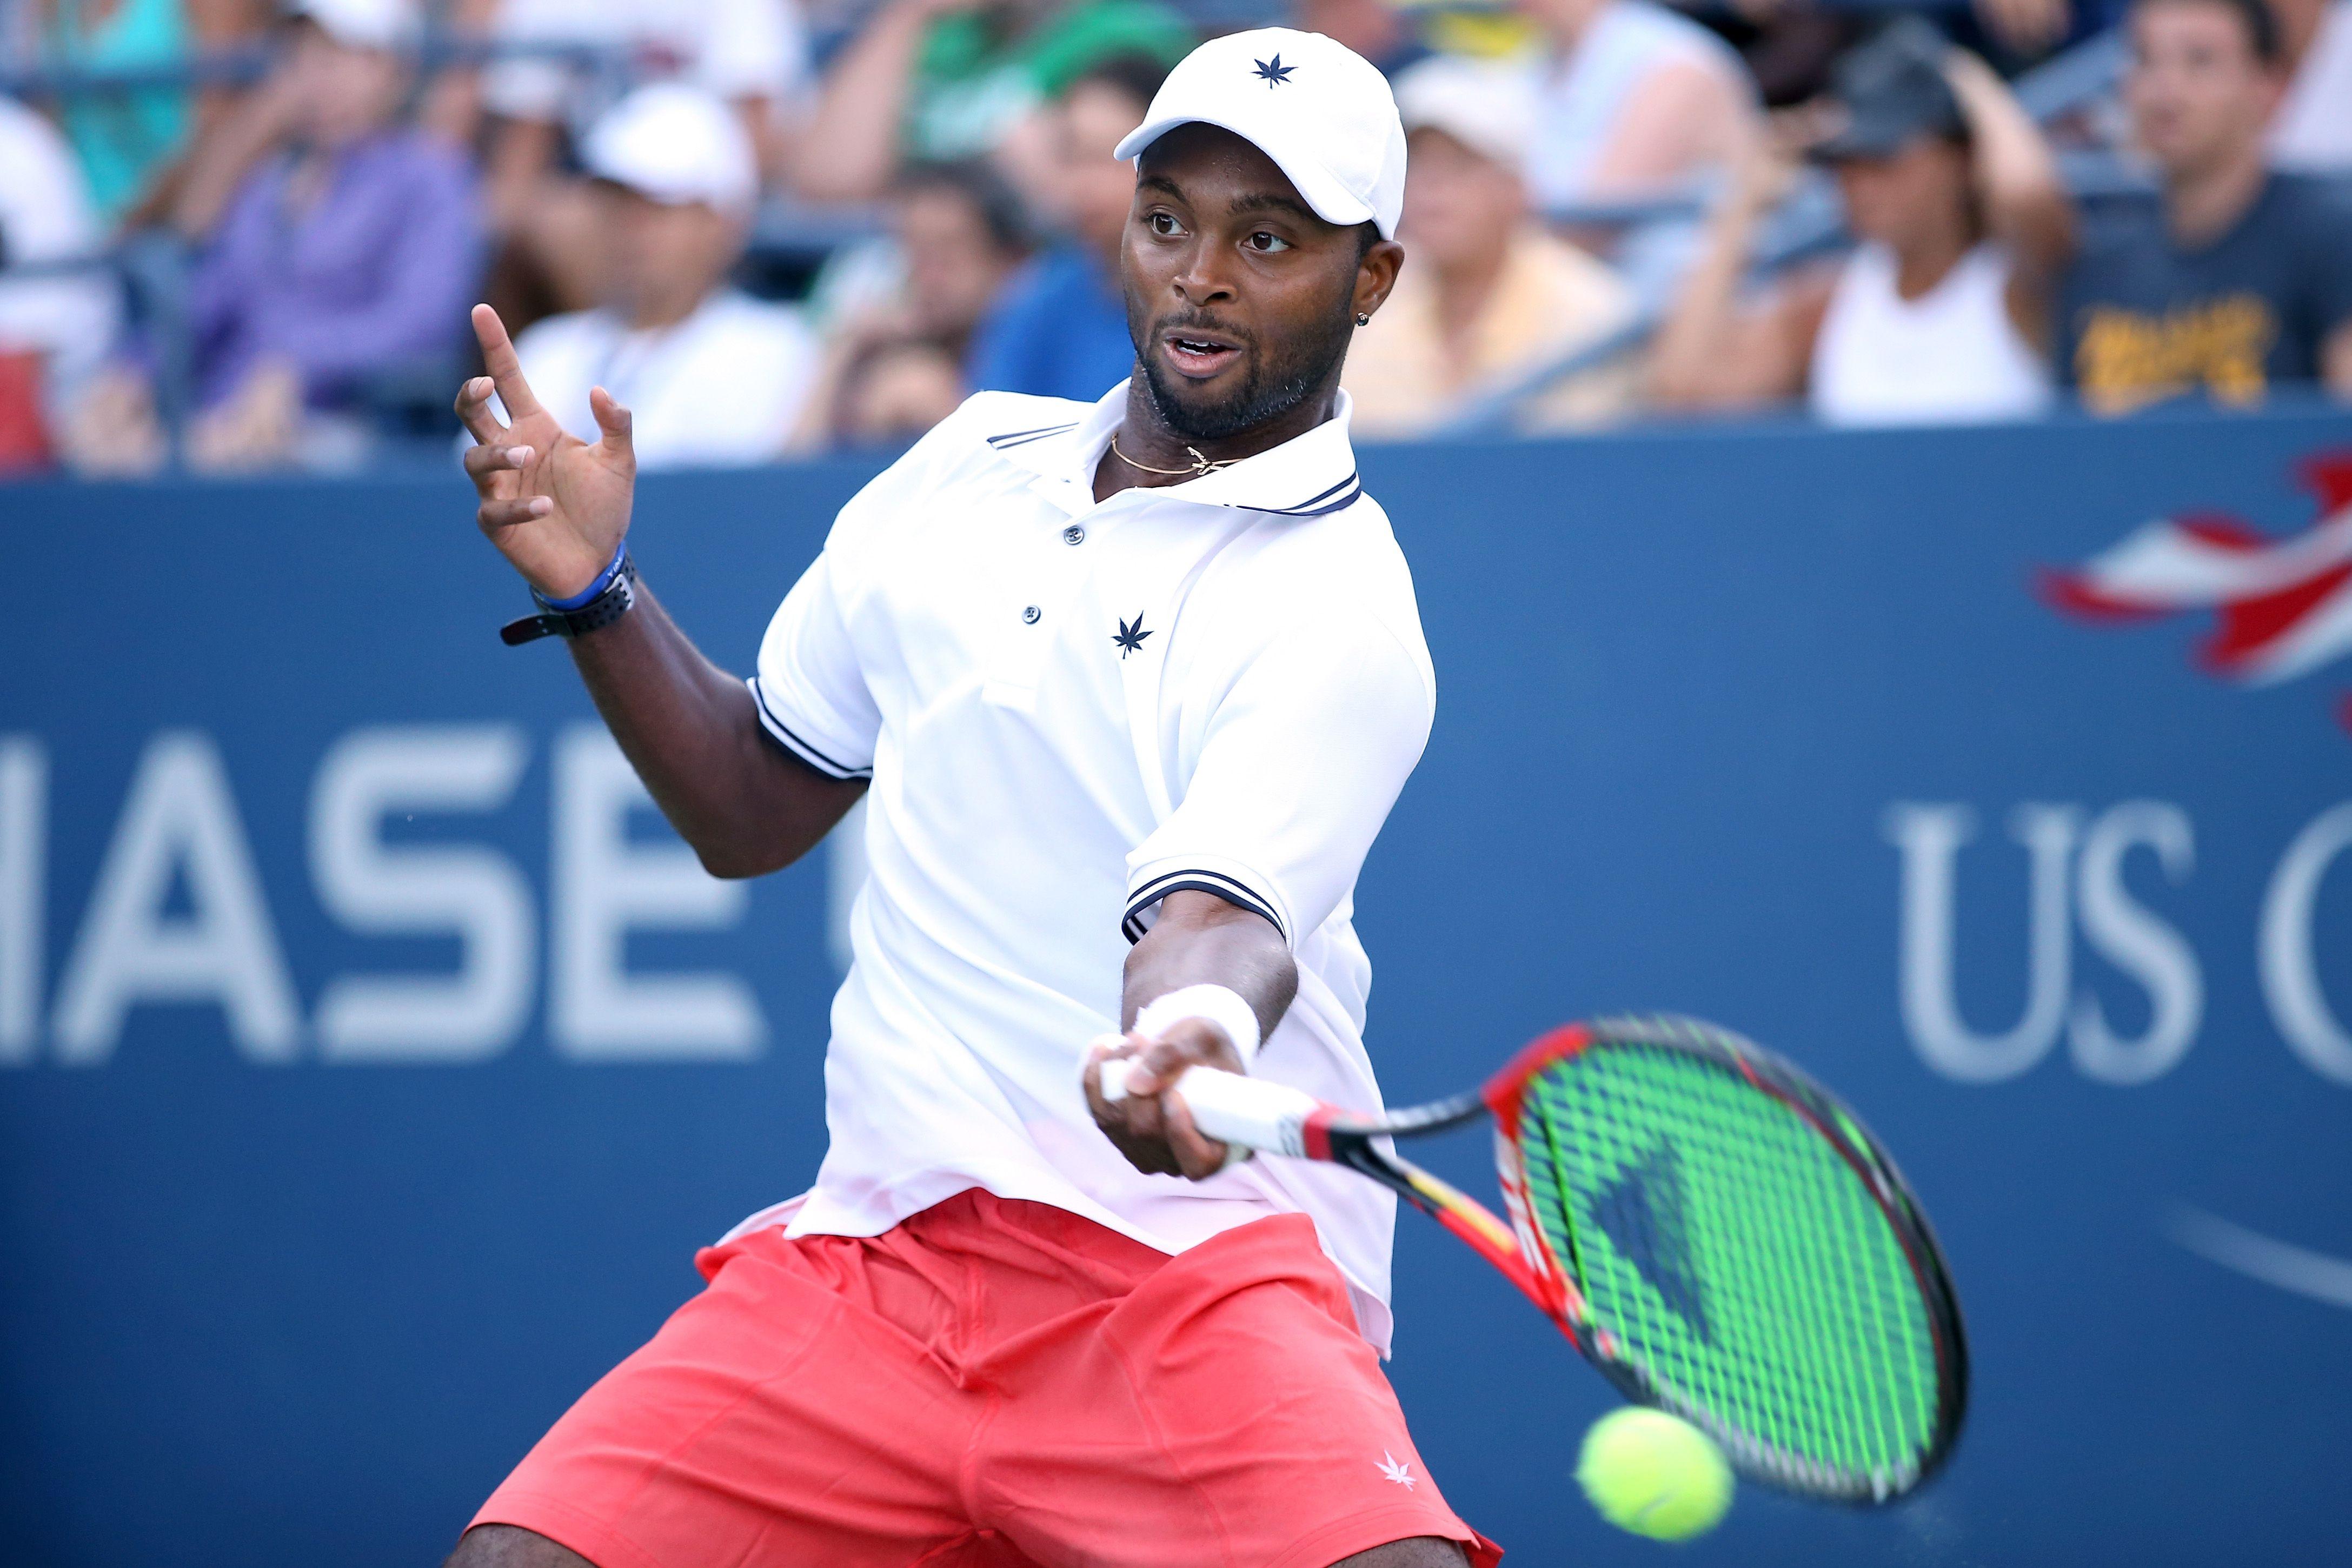 Tennis Shirt Brand Logo - Tennis Brand Boast Gets Boost at U.S. Open From Donald Young | Fortune